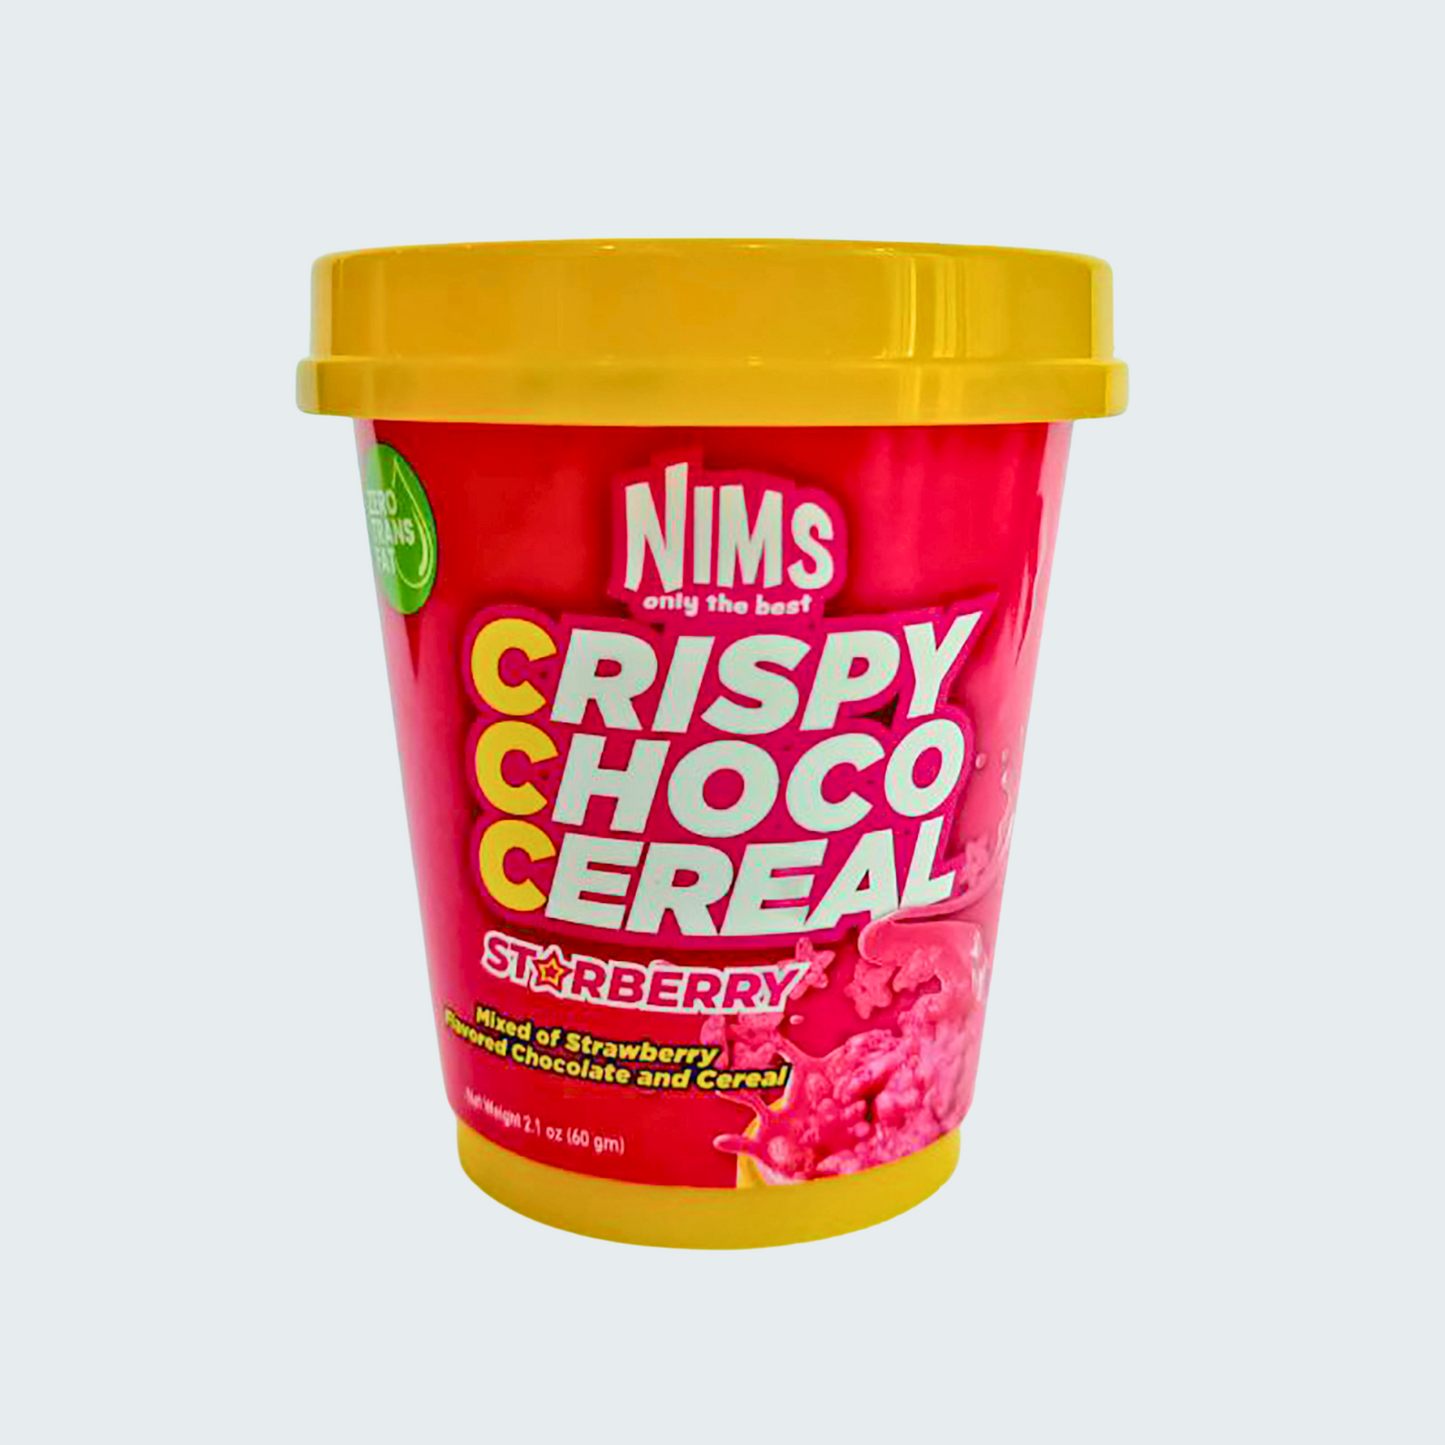 NIMS Crispy Choco Cereal, Starberry, Mixed of Strawberry-flavored Chocolate and Cereal, Ready to Eat, 2.1 oz (60 gm), a pack of 12